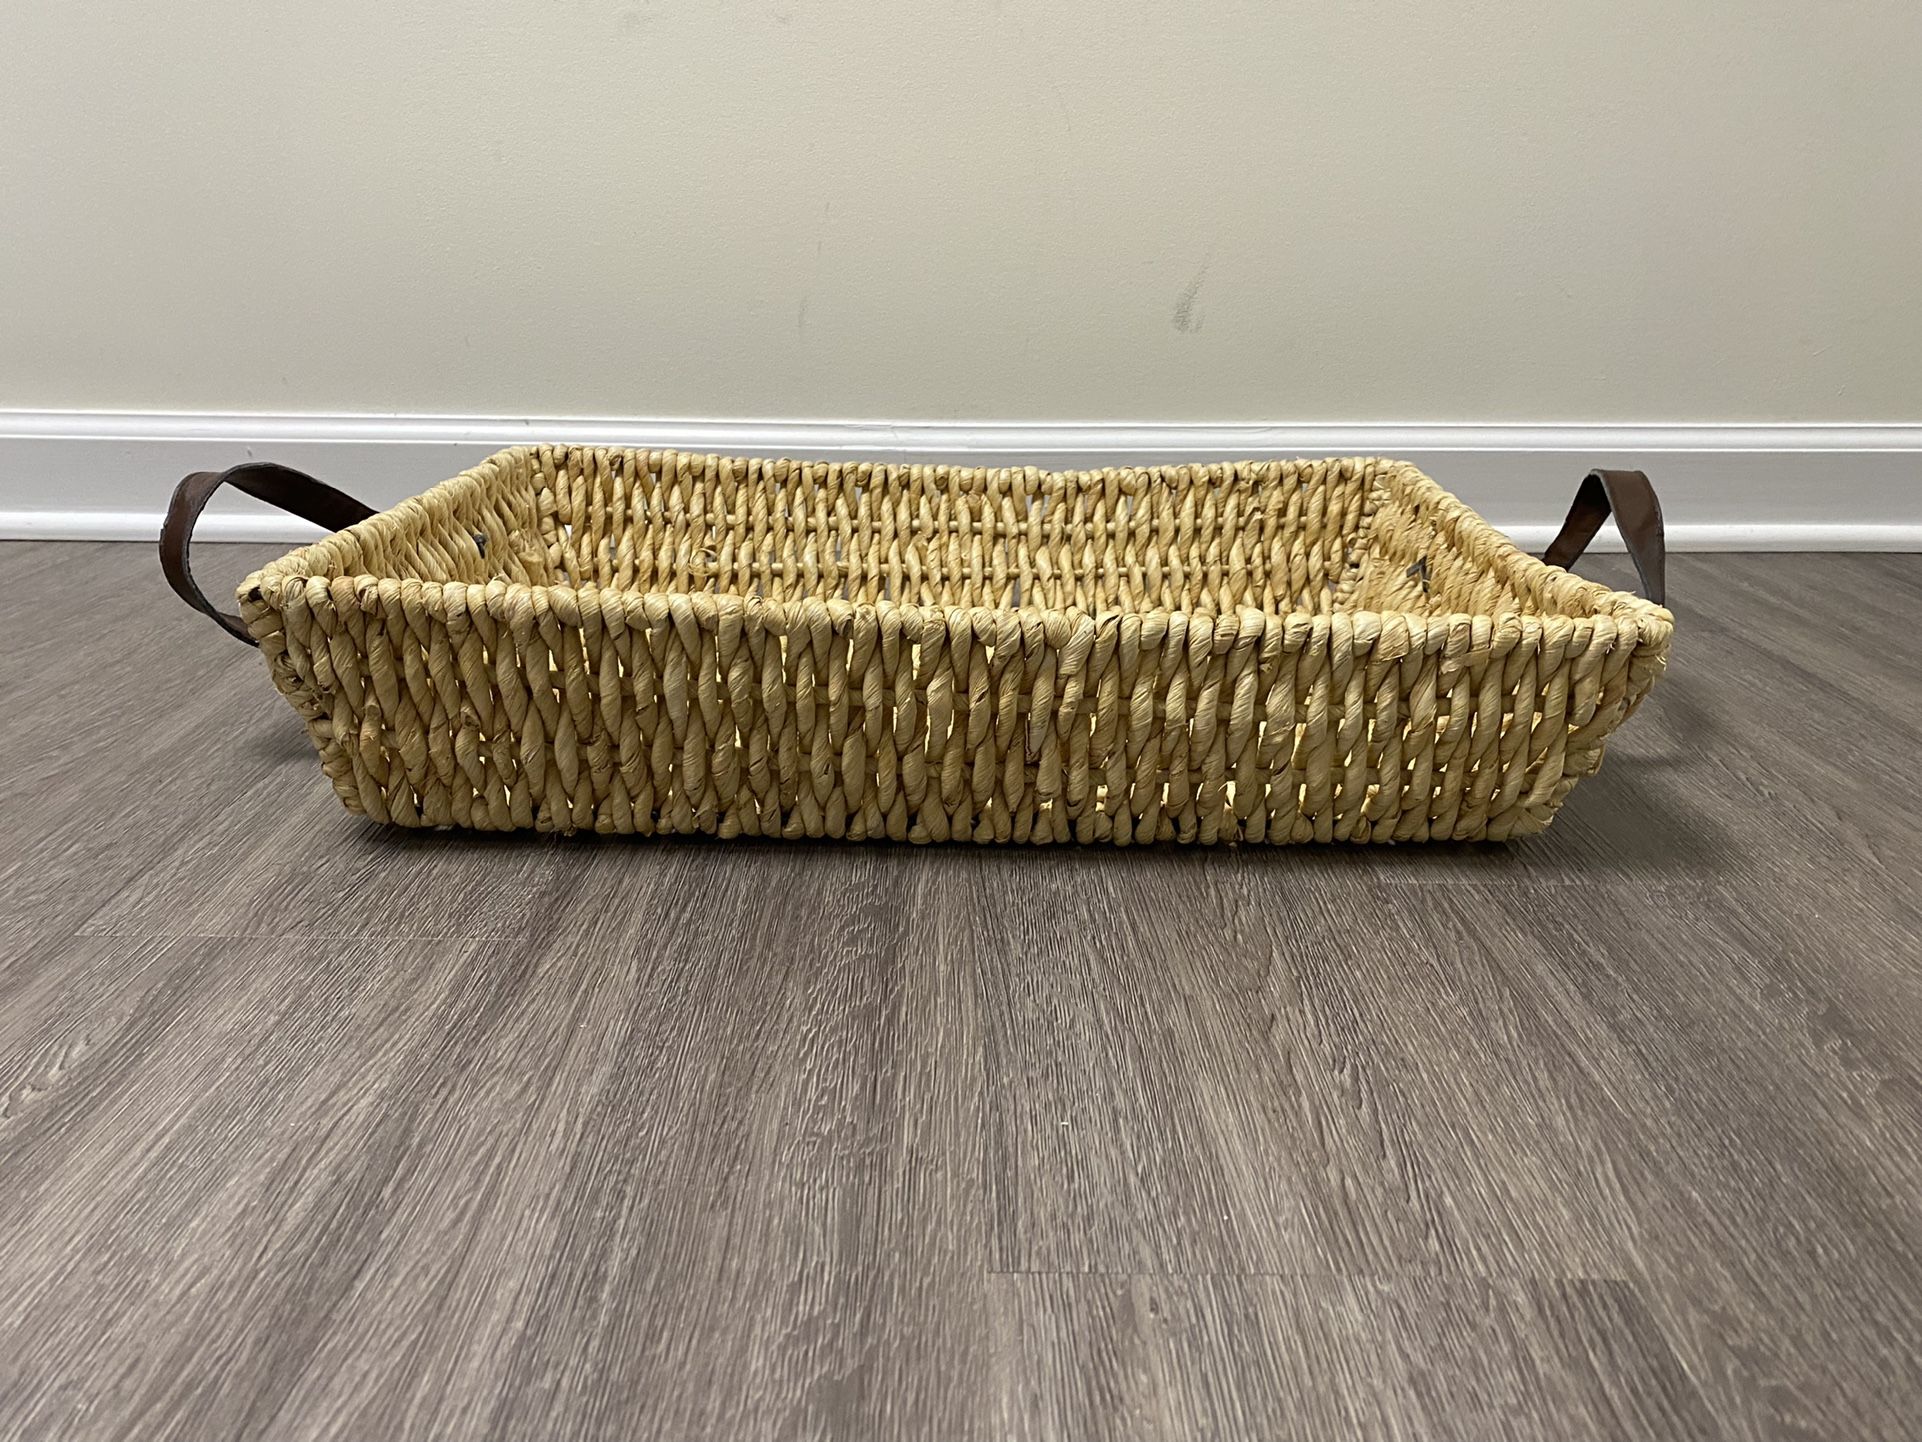 Wicker Basket 21x15 In, Great Condition $10